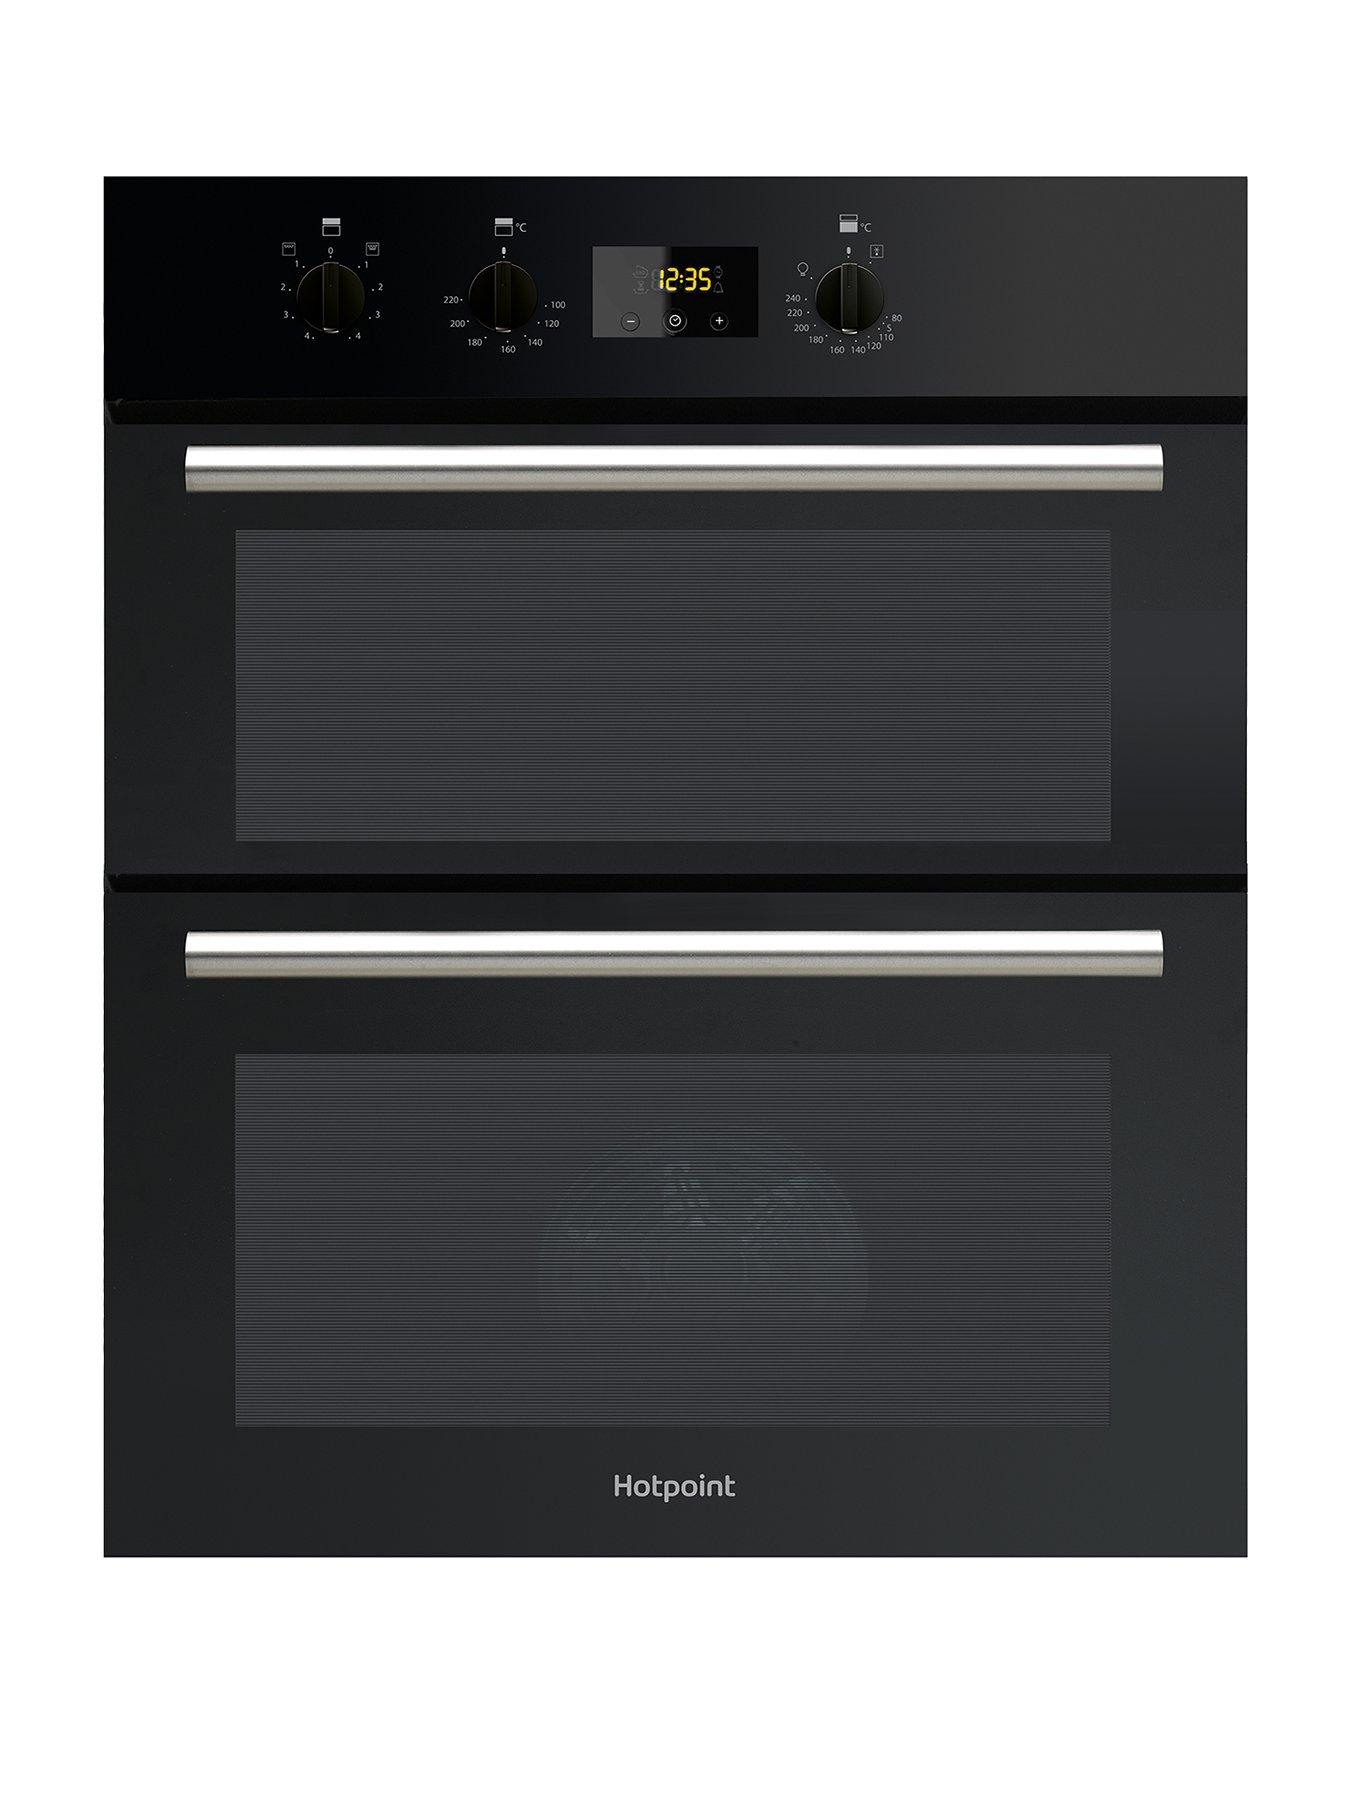 Hotpoint Class 2 Du2540Bl 60Cm Electric Built-Under Double Oven - Black - Oven Only